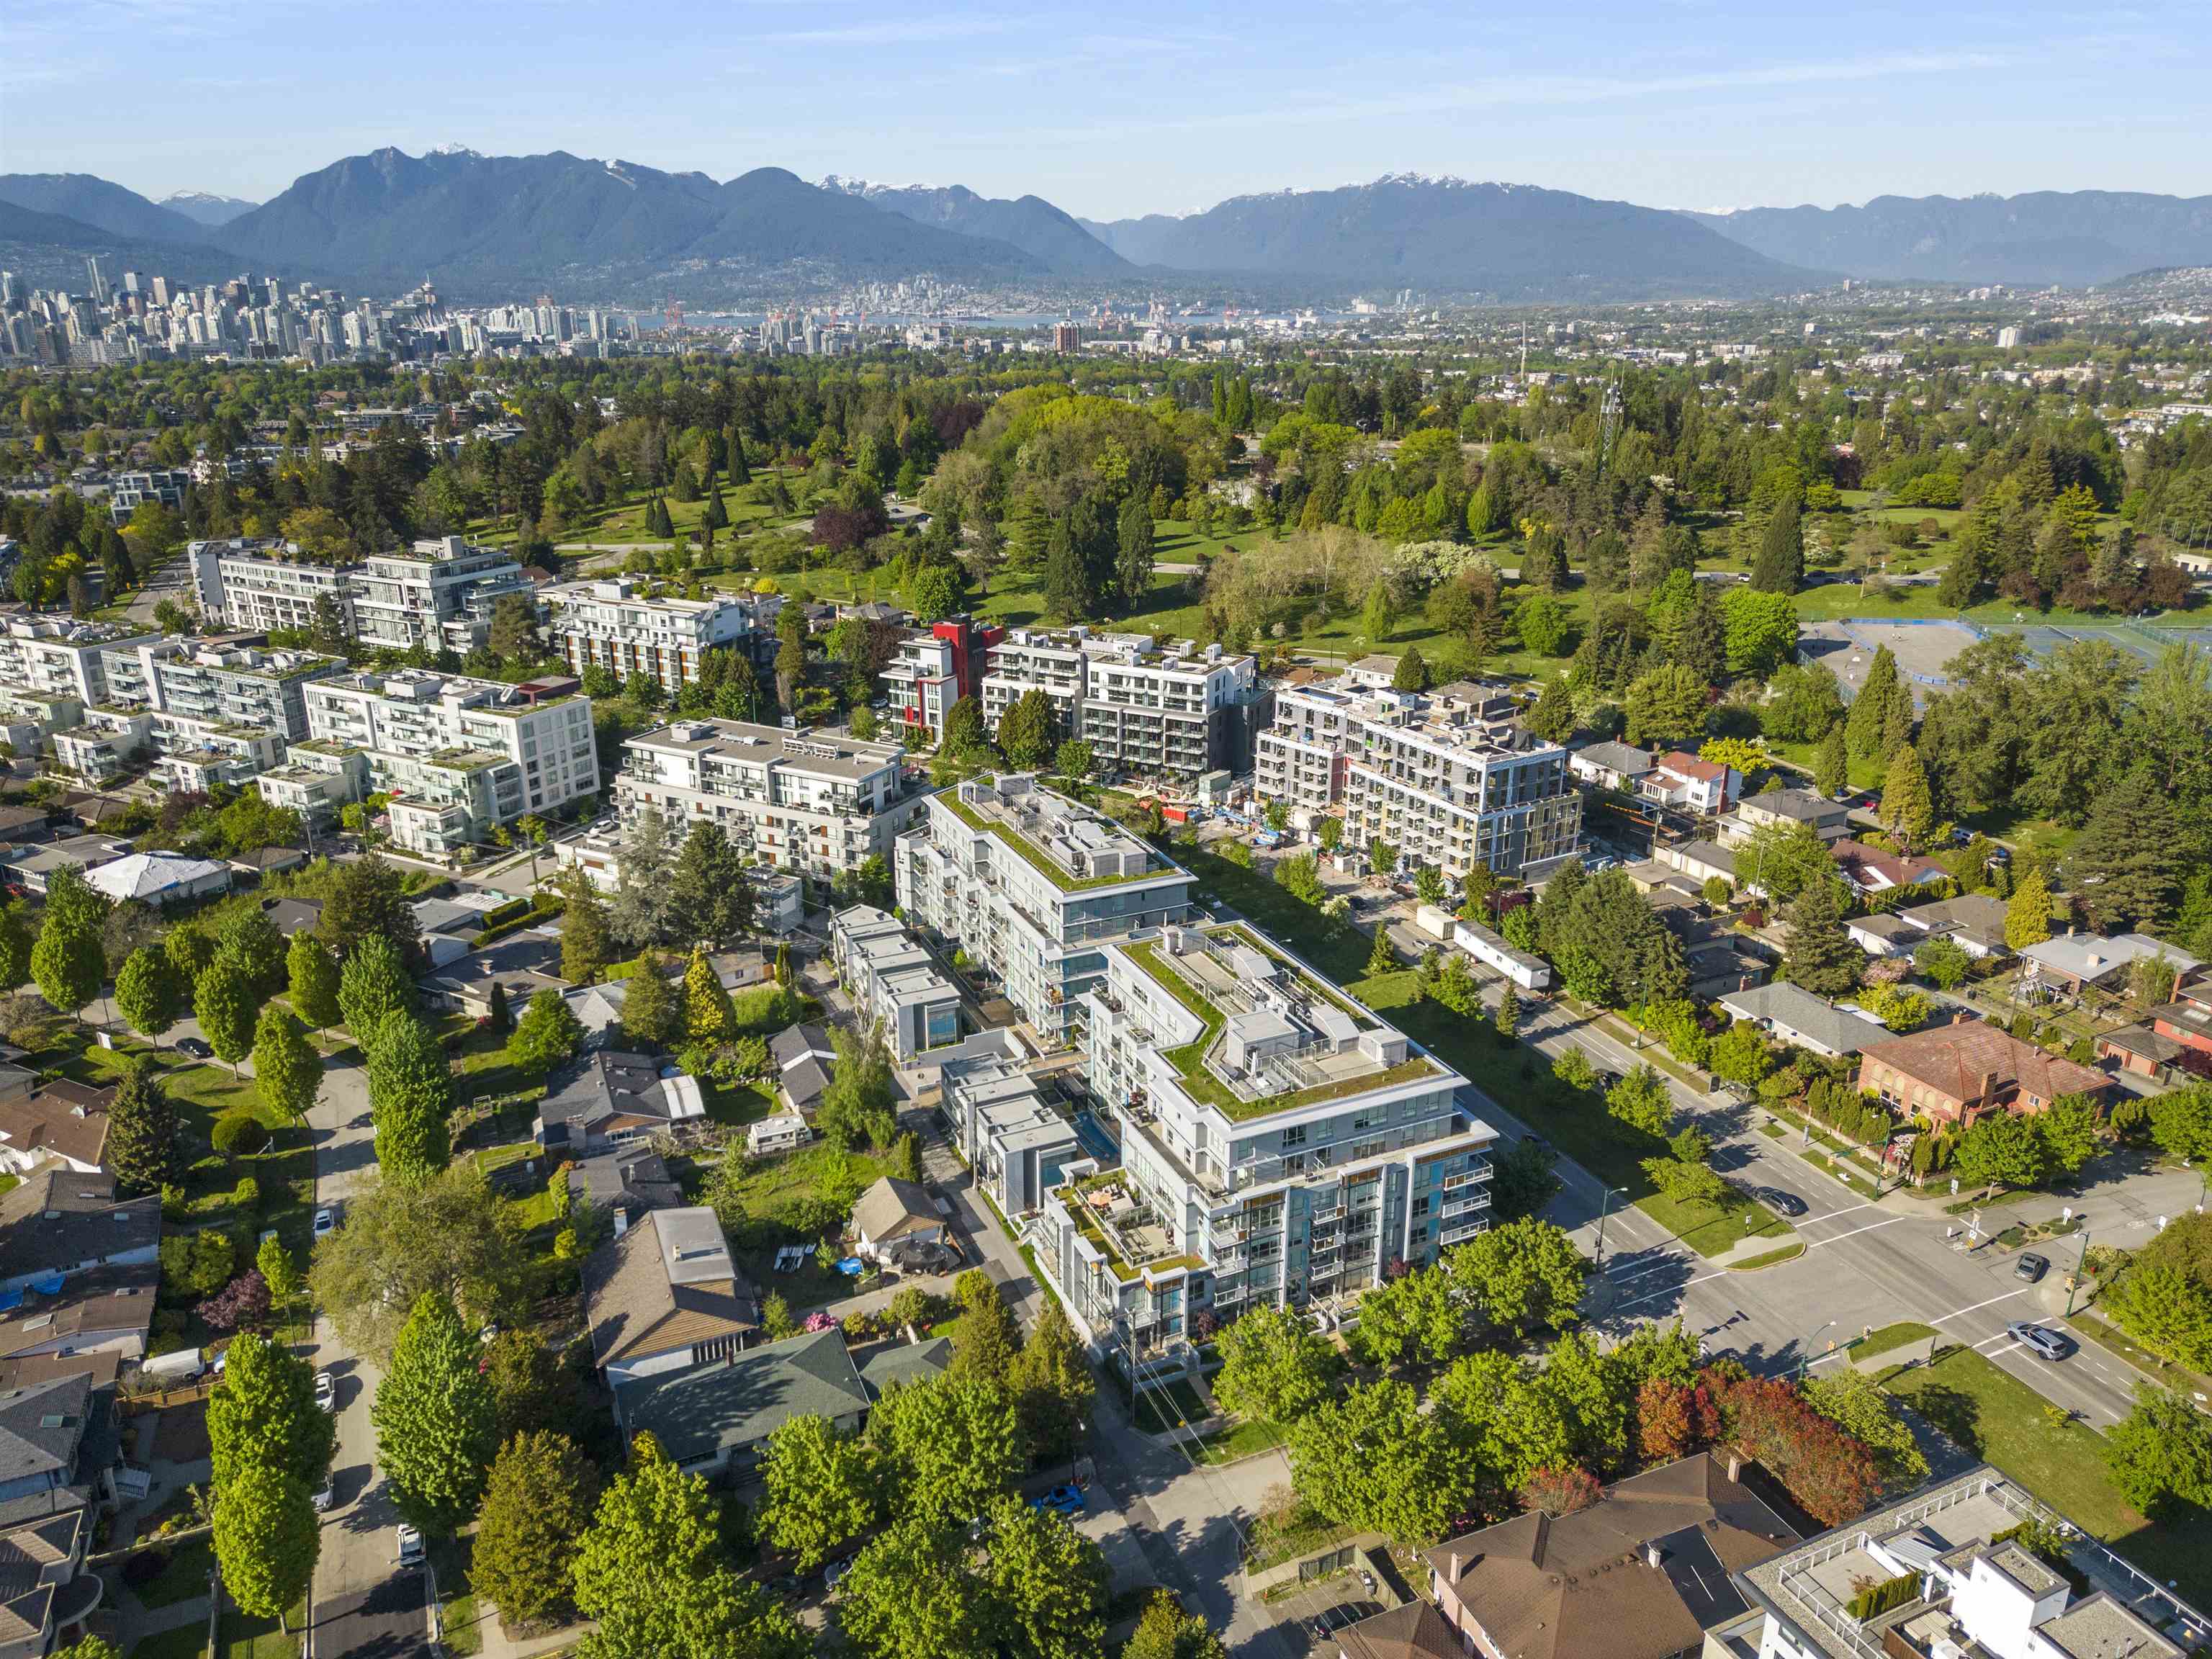 Listing image of 506 5289 CAMBIE STREET